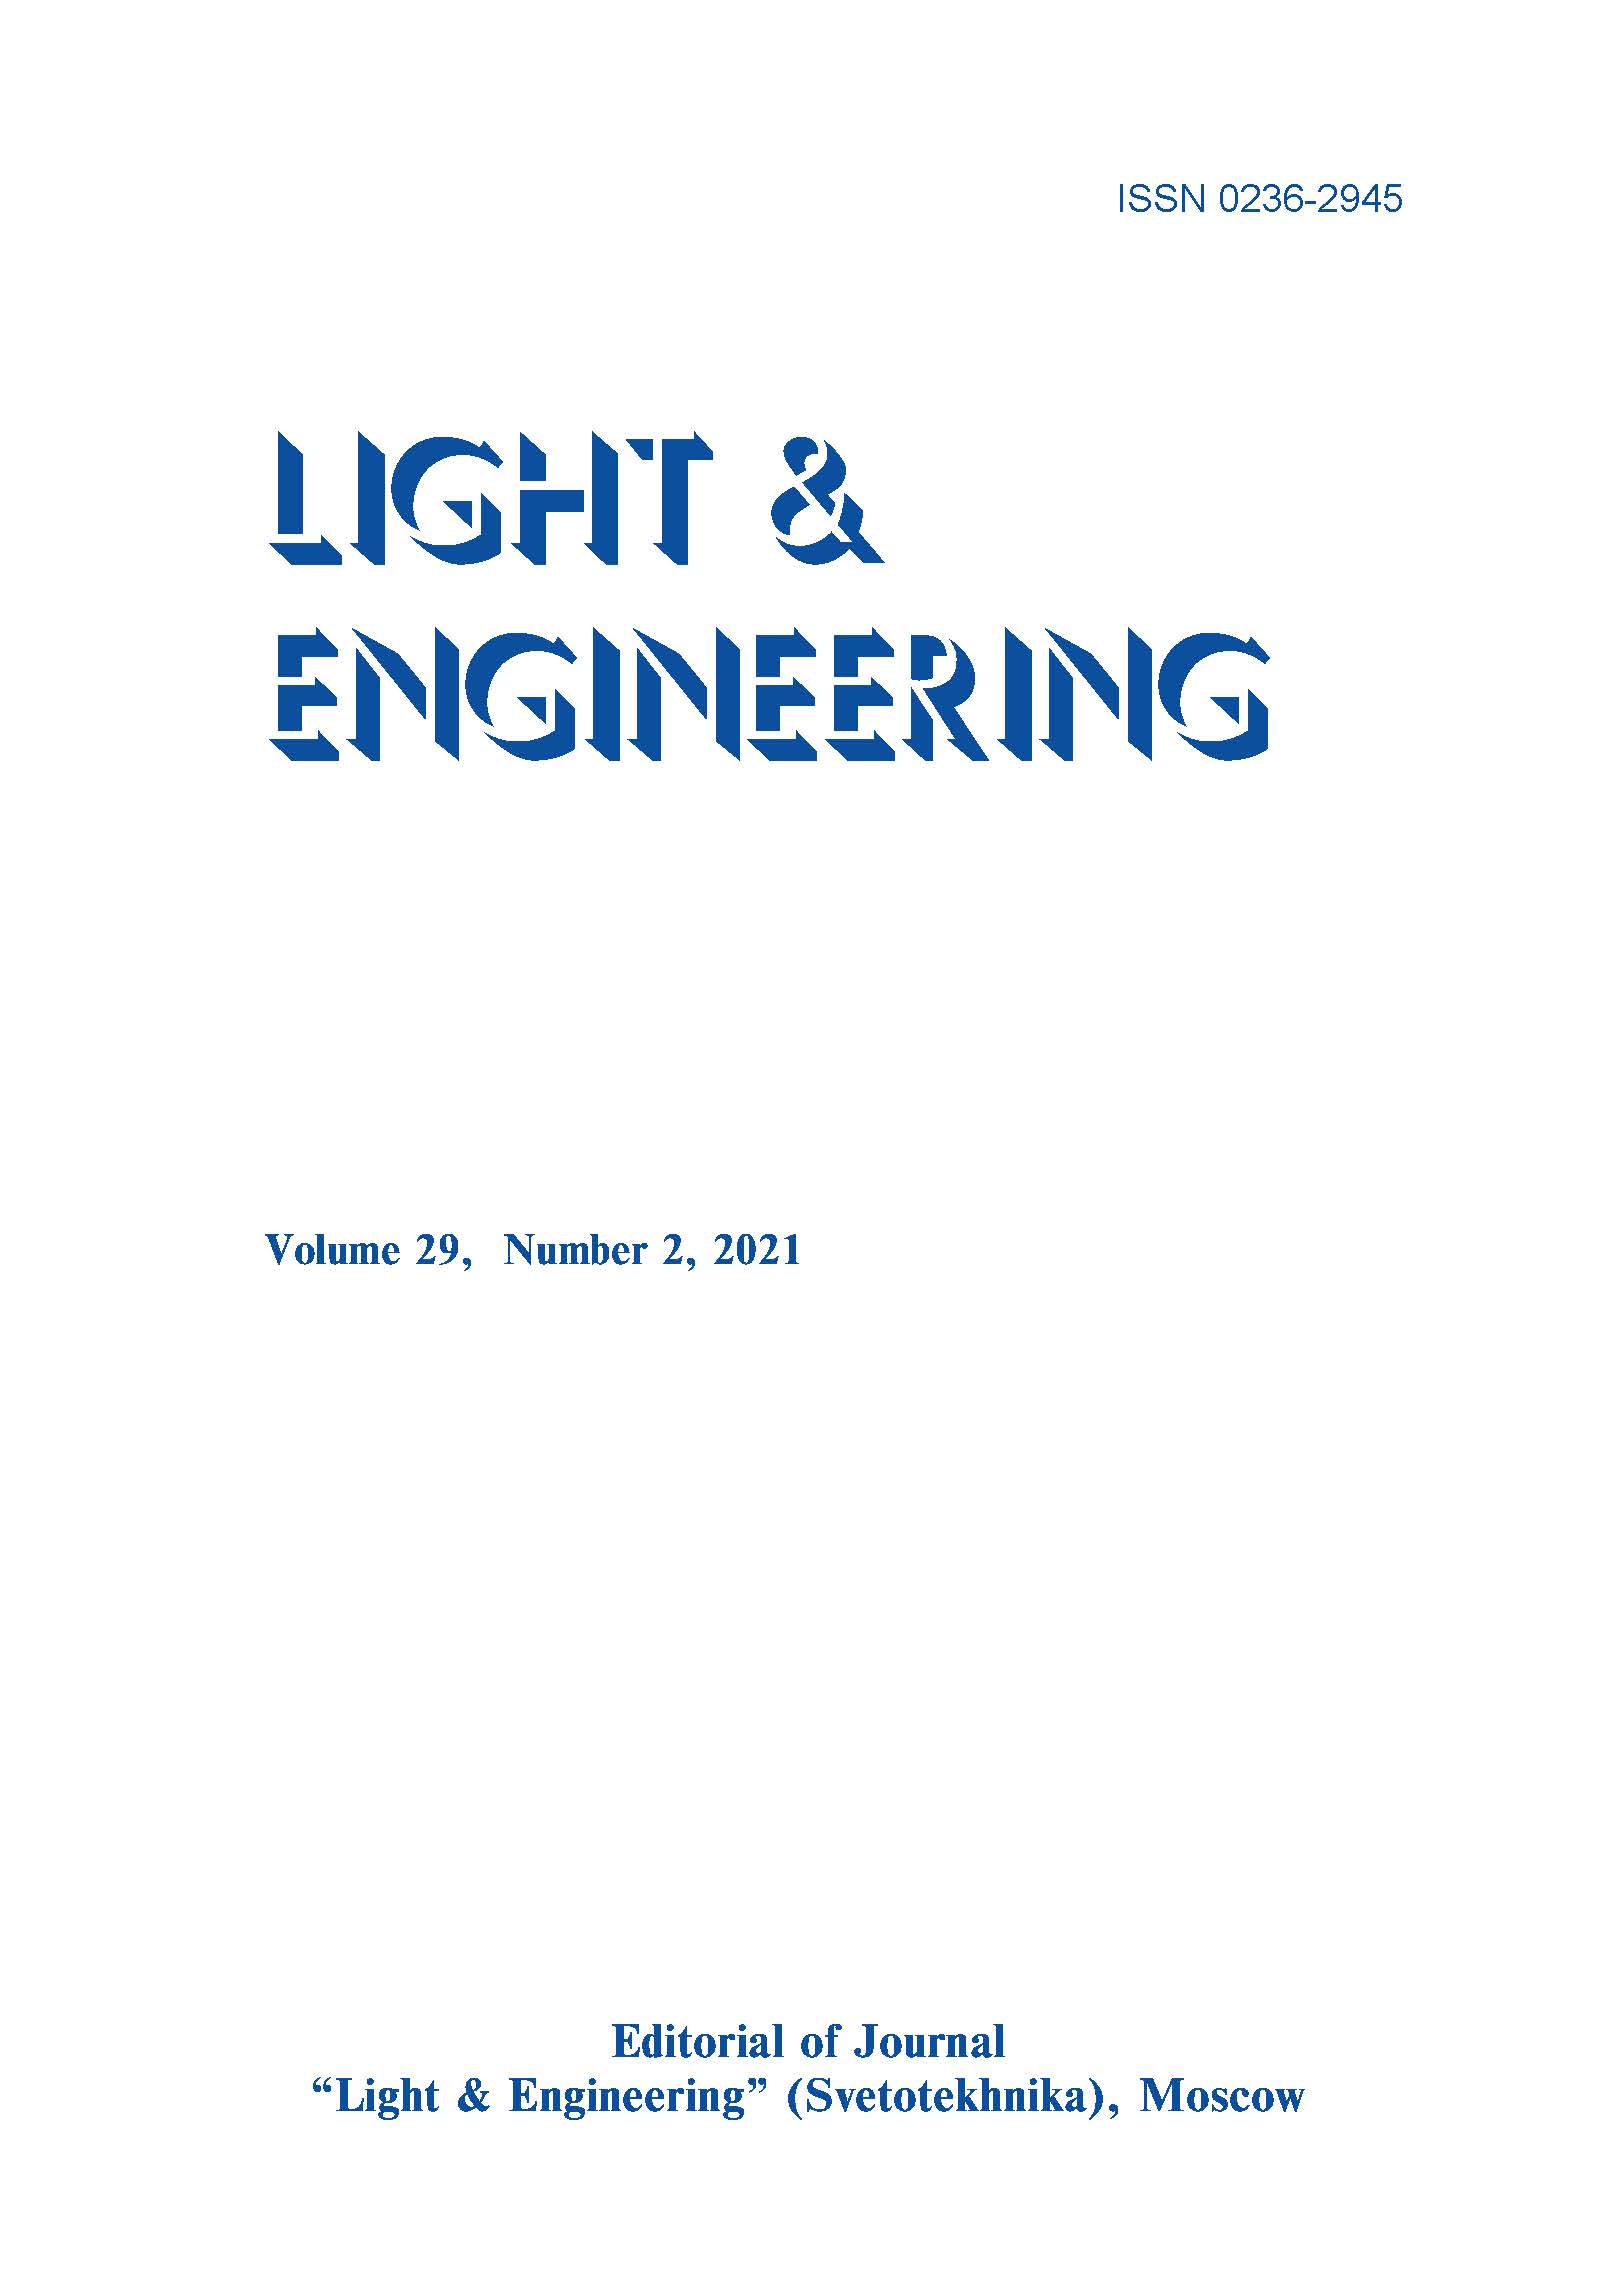 Design and Analysis of High-Efficient Driver Model for LED Luminaires L&E, Vol. 29, No. 2, 2021